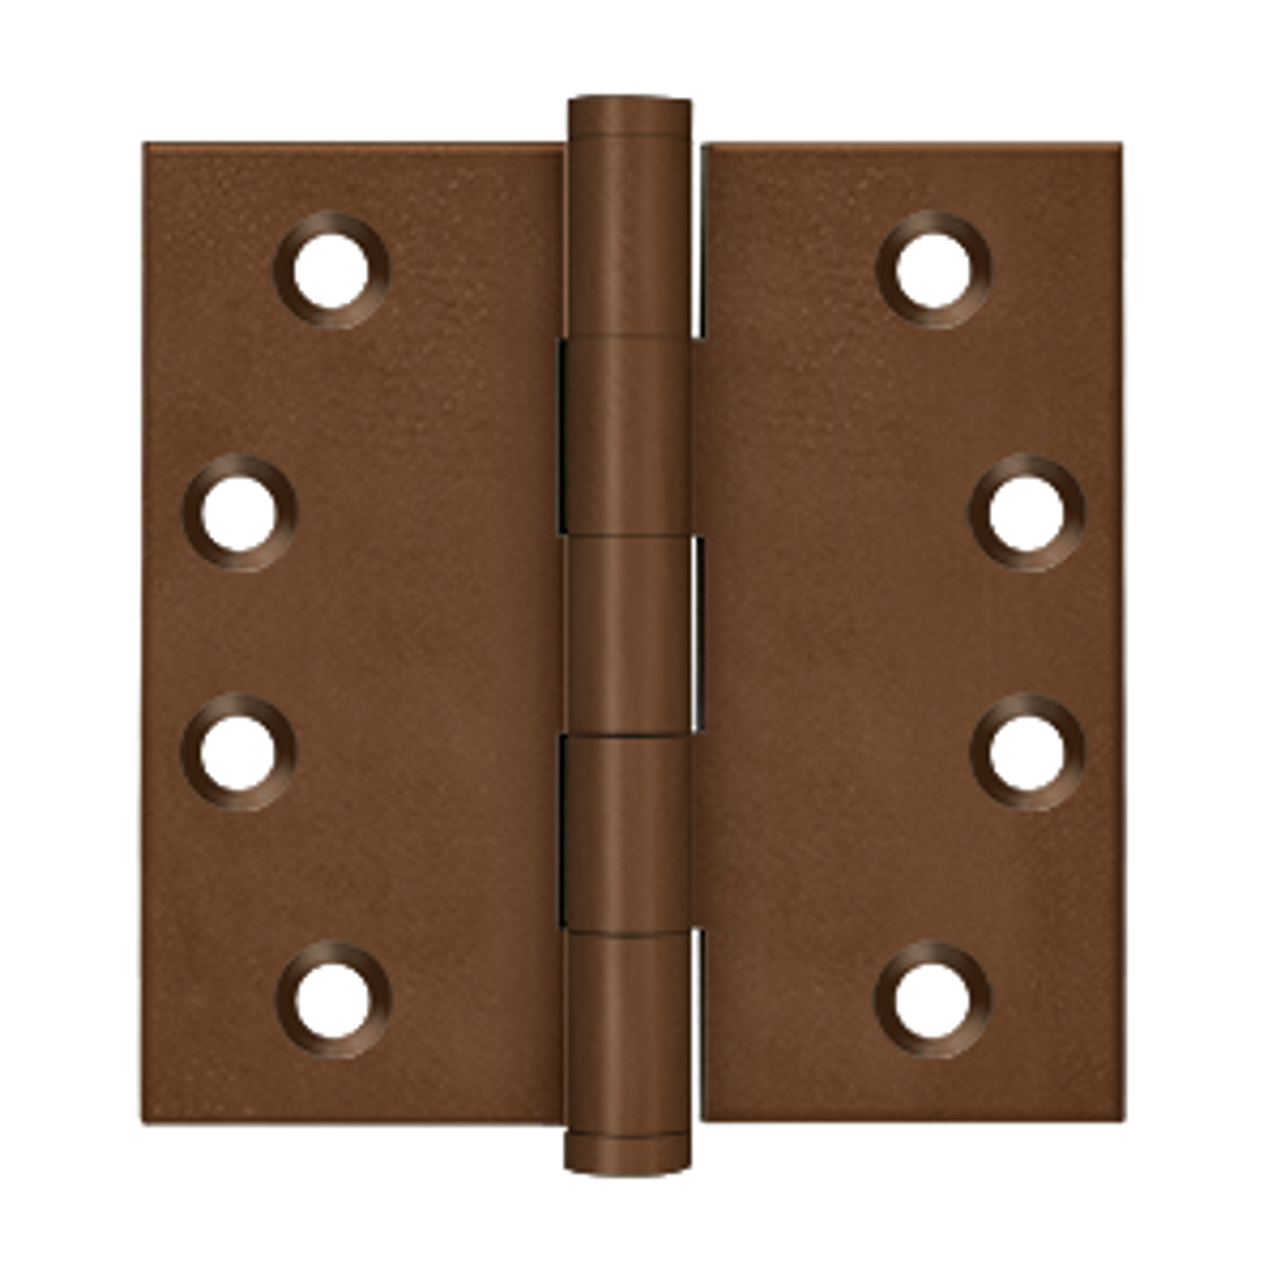 DELTANA DSB4 4" X 4" SQUARE HINGES DISTRESSED FINISHES SOLID BRASS